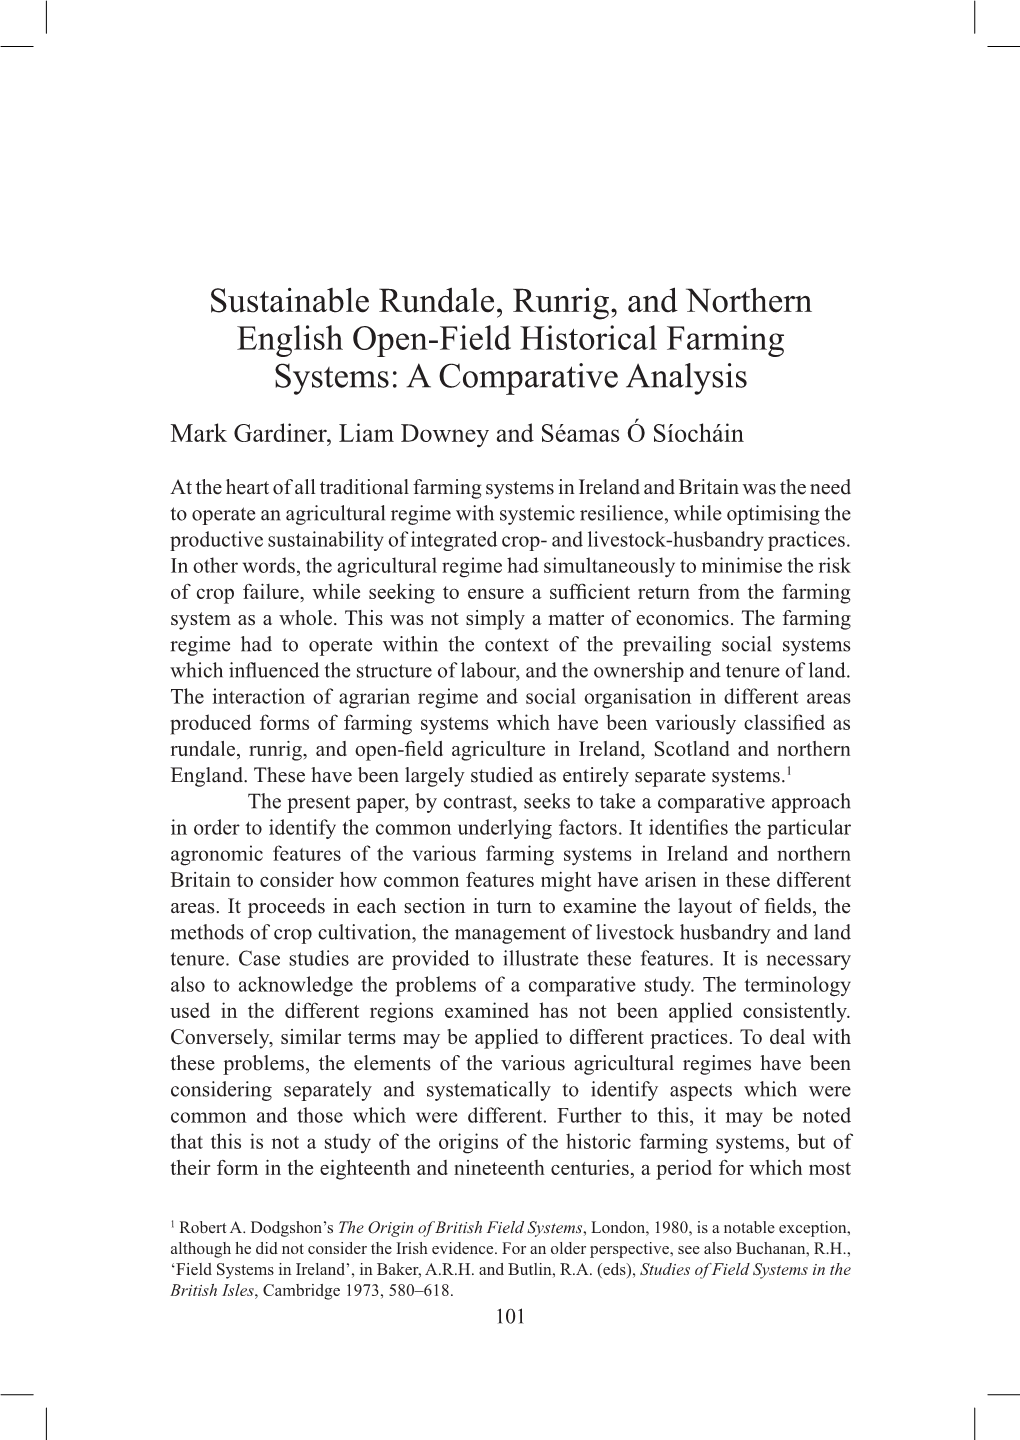 Sustainable Rundale, Runrig, and Northern English Open-Field Historical Farming Systems: a Comparative Analysis Mark Gardiner, Liam Downey and Séamas Ó Síocháin